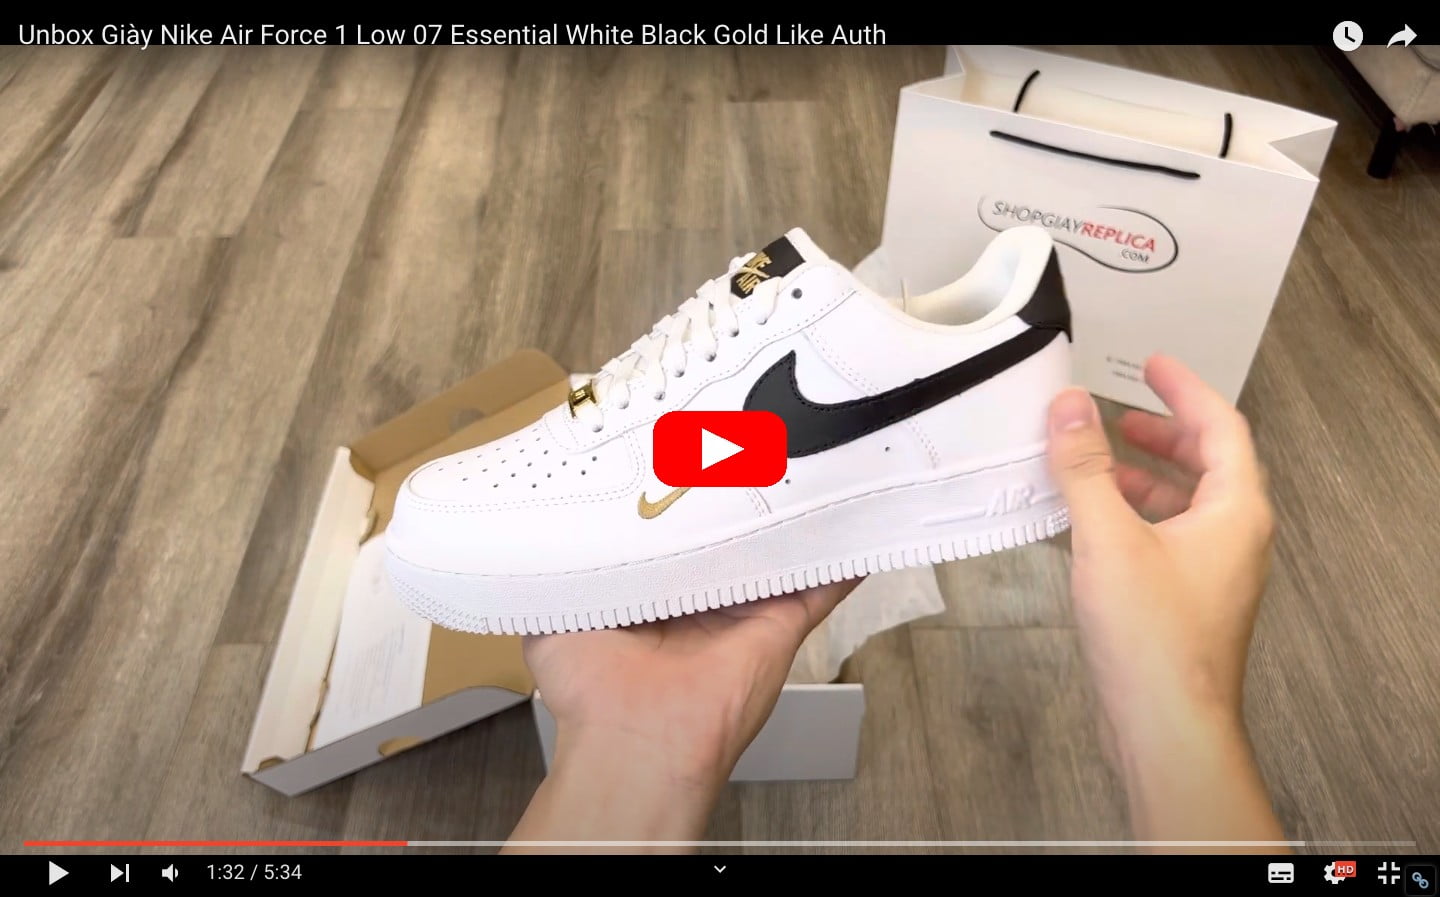 Video Giày Nike Air Force 1 Low 07 Essential White Black Gold Like Auth